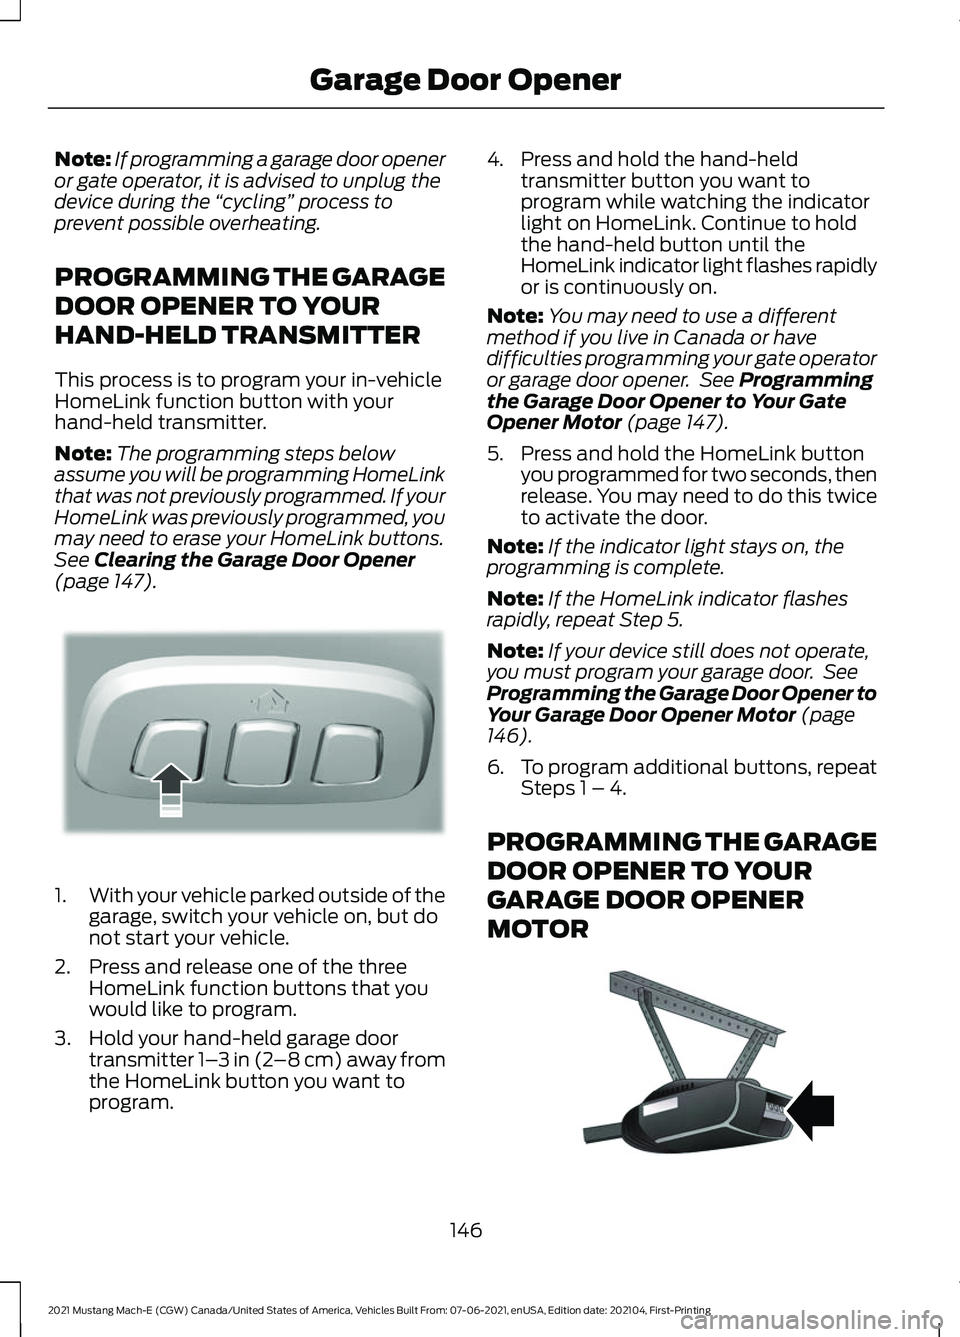 FORD MUSTANG MACH-E 2021  Owners Manual Note:
If programming a garage door opener
or gate operator, it is advised to unplug the
device during the  “cycling”  process to
prevent possible overheating.
PROGRAMMING THE GARAGE
DOOR OPENER TO